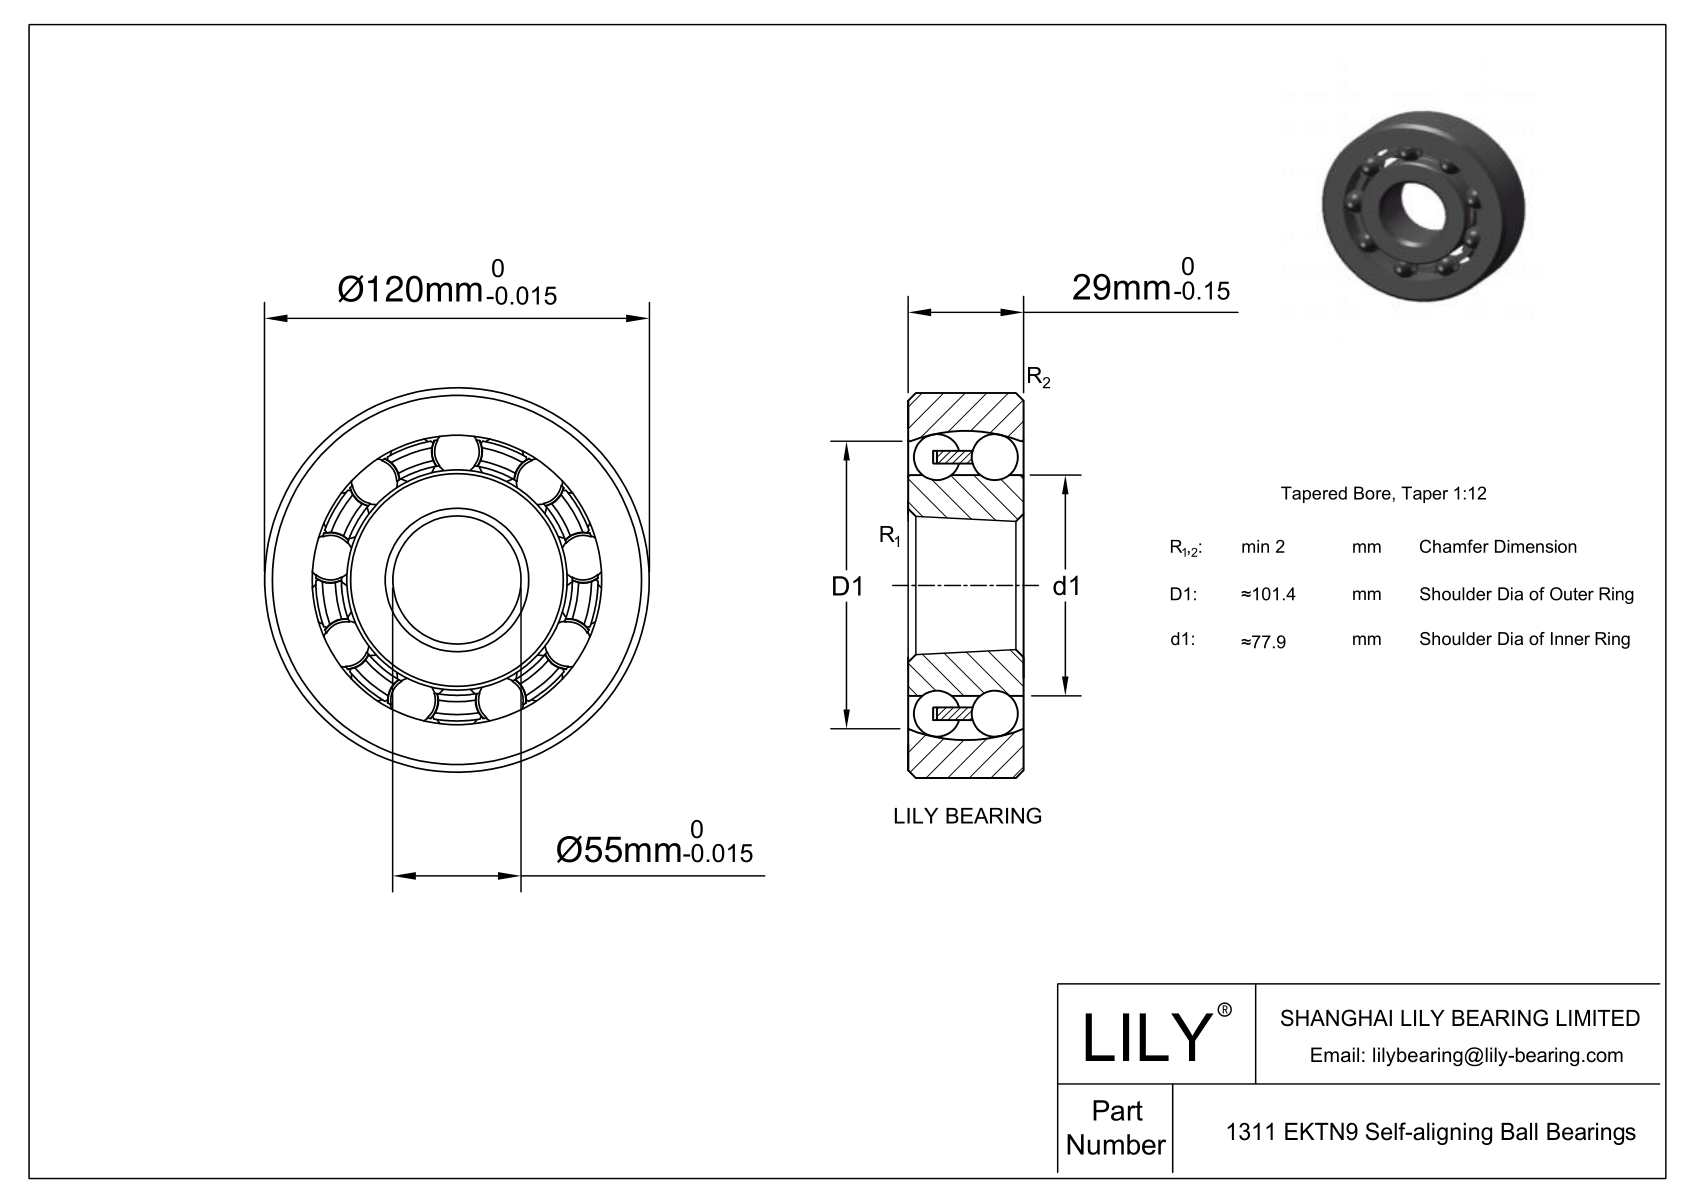 CE1311SC Silicon Carbide Self Aligning Ball Bearings cad drawing